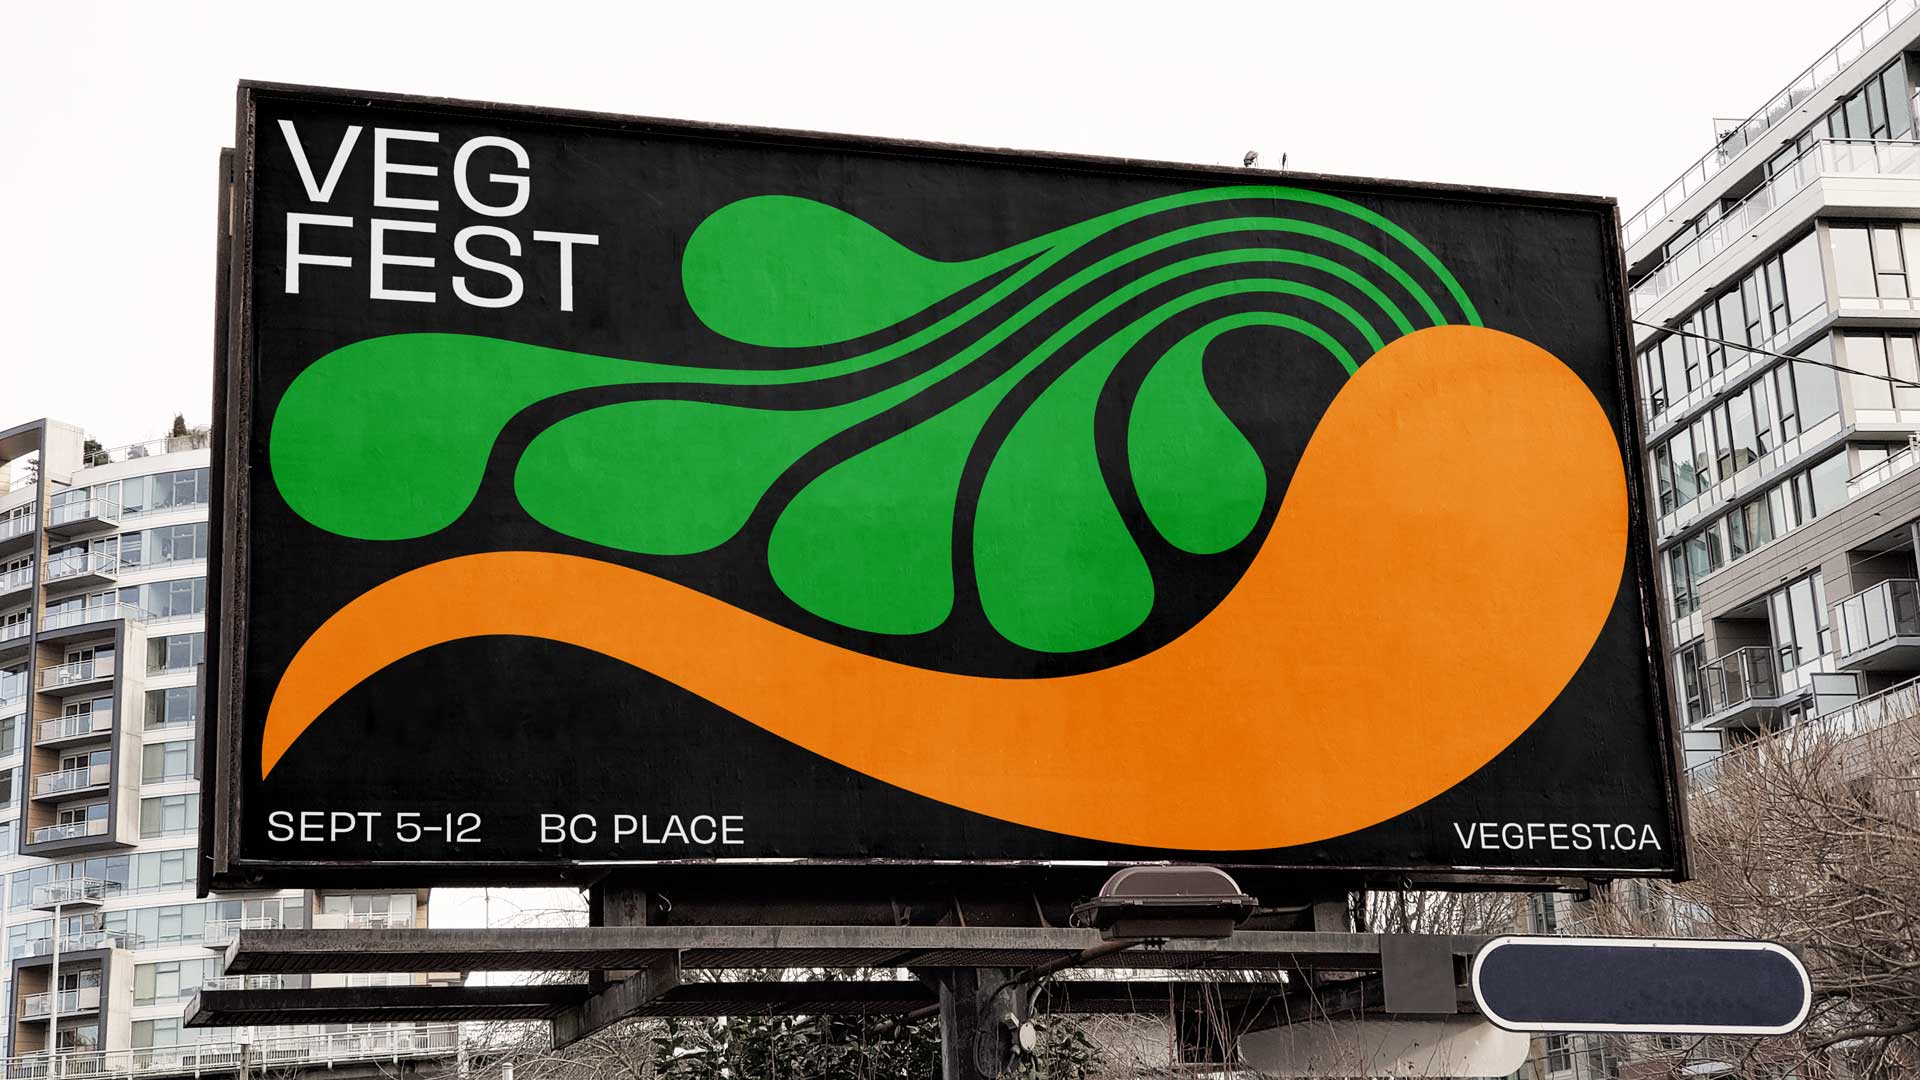 A big billboard with a highly stylized illustration of a carrot on a black background. The billboard text reads “Veg Fest. Sept 5-12. BC Place”